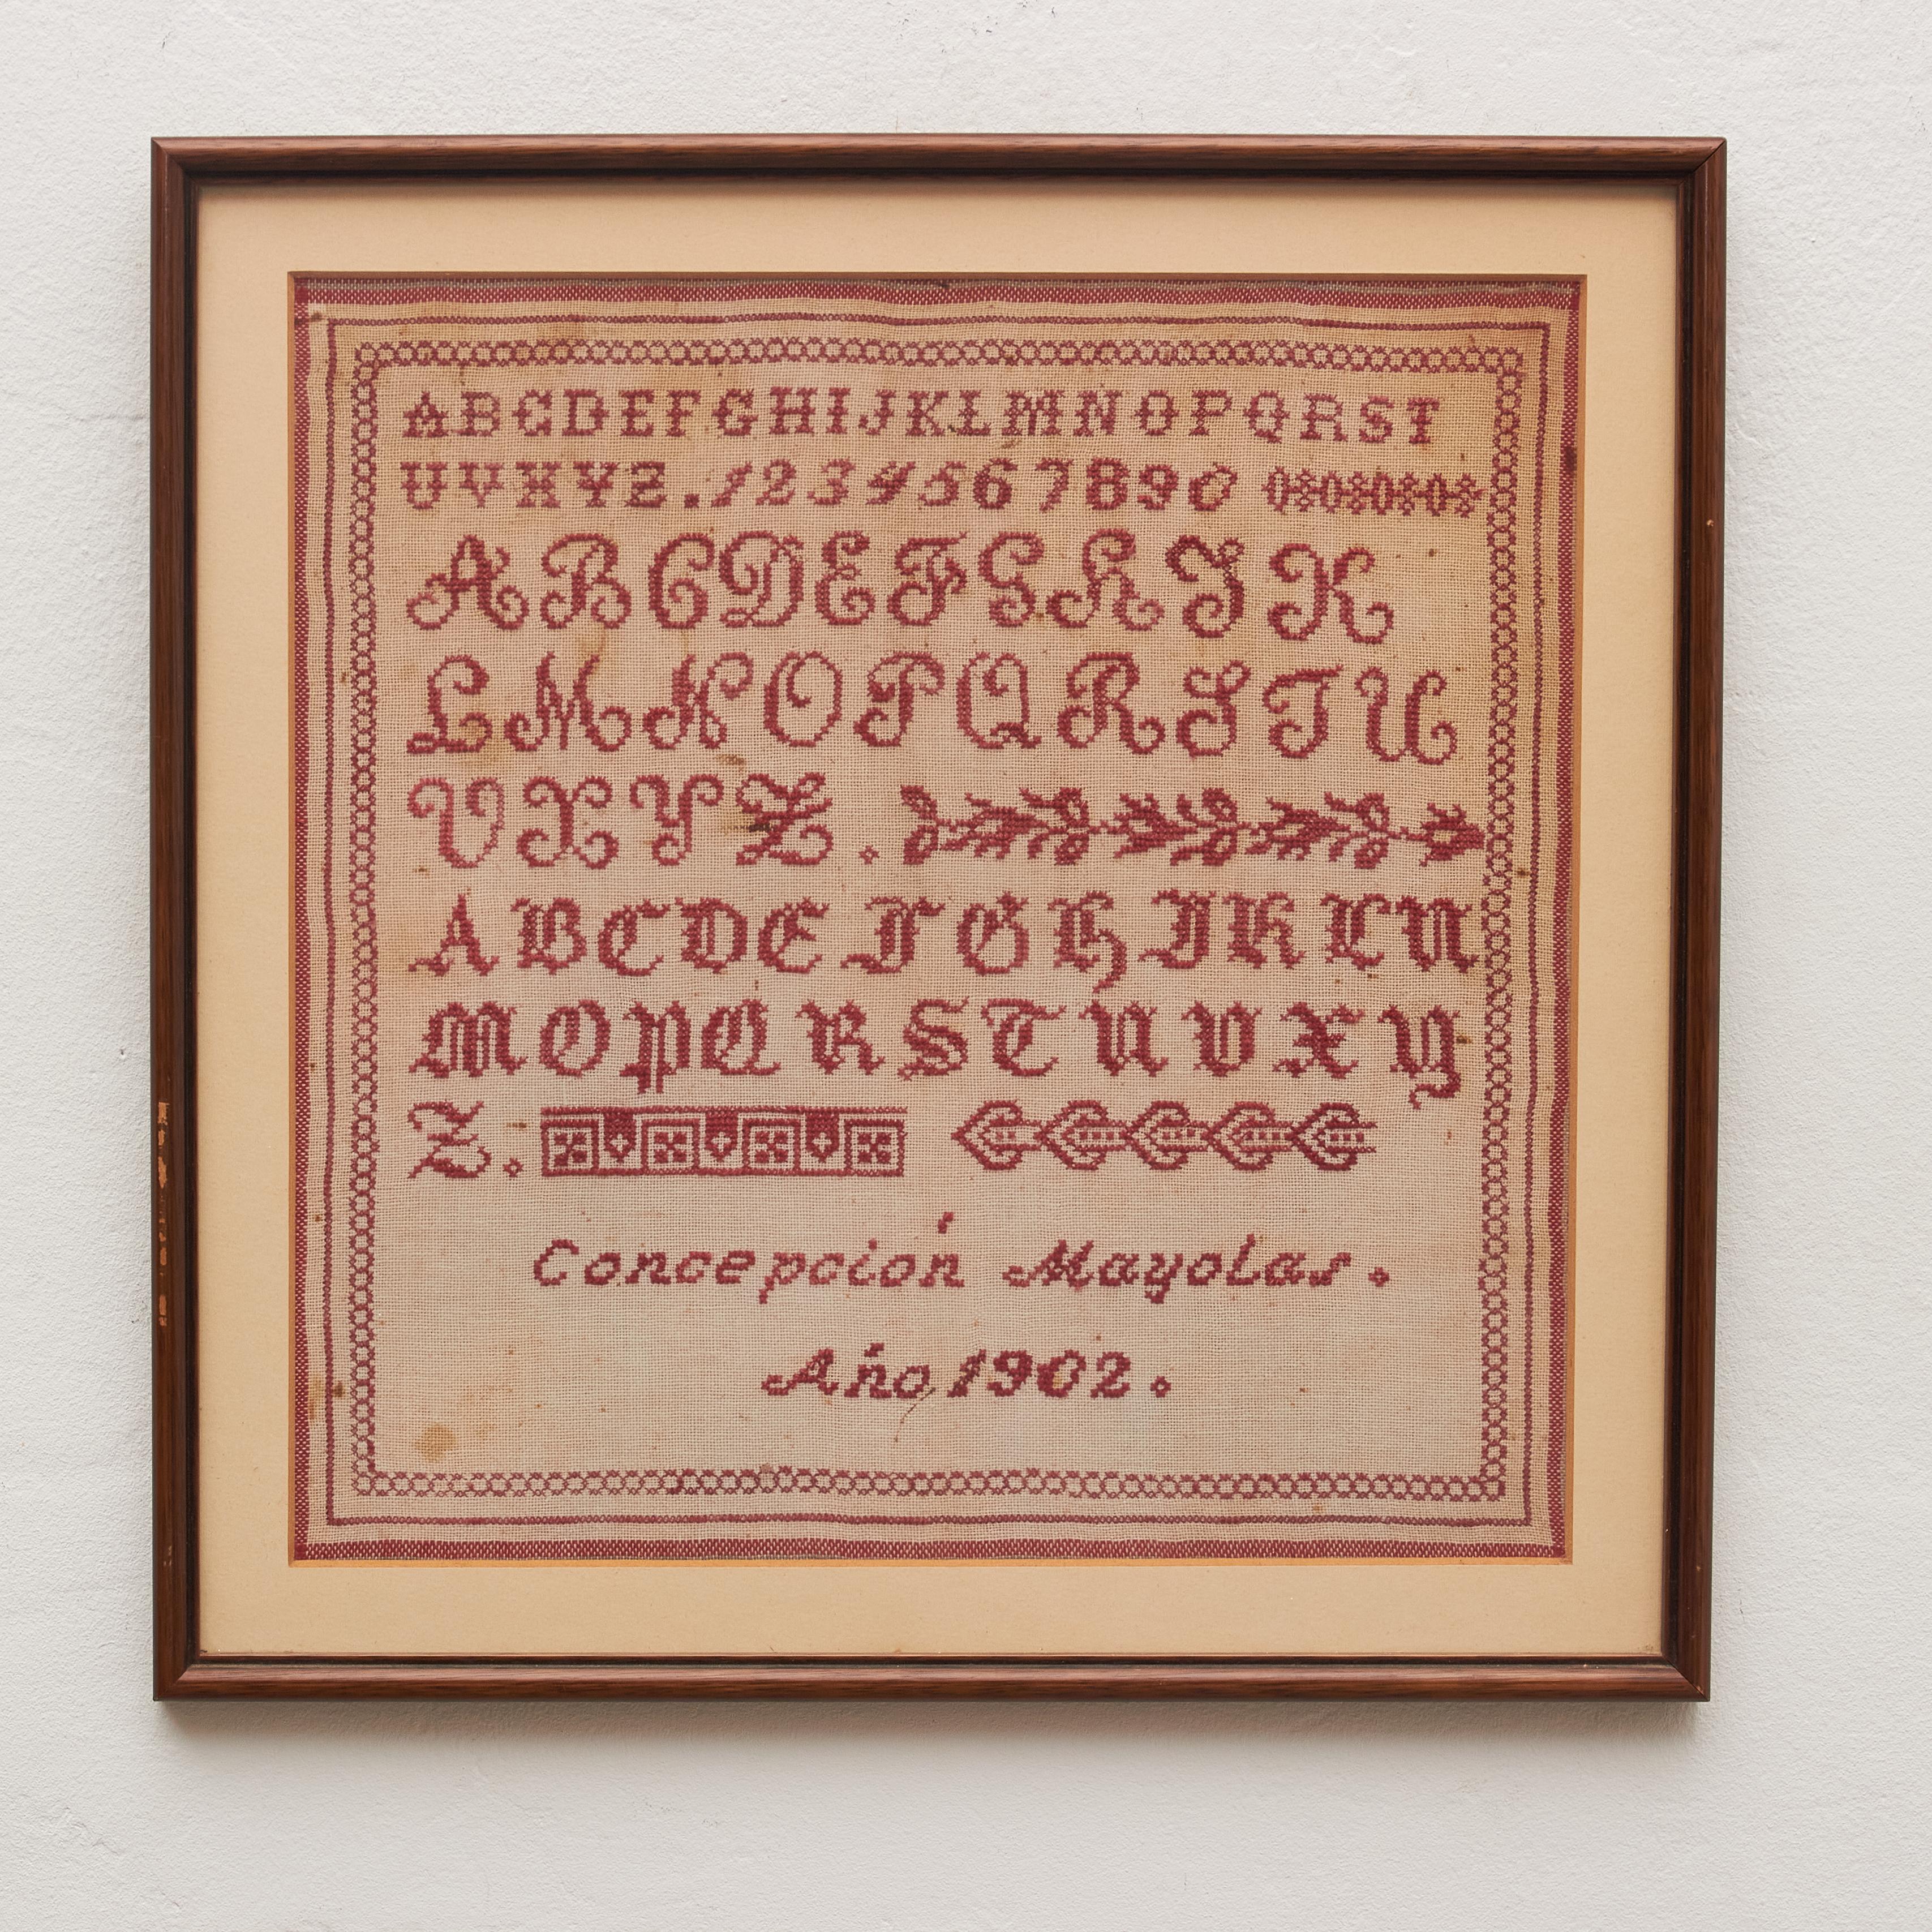 Transport yourself to a bygone era with our vintage cross-stitch sampler from the early 20th century. This timeless piece features a classic red-on-white design adorned with meticulously crafted alphabet letters, numbers, and an enchanting border